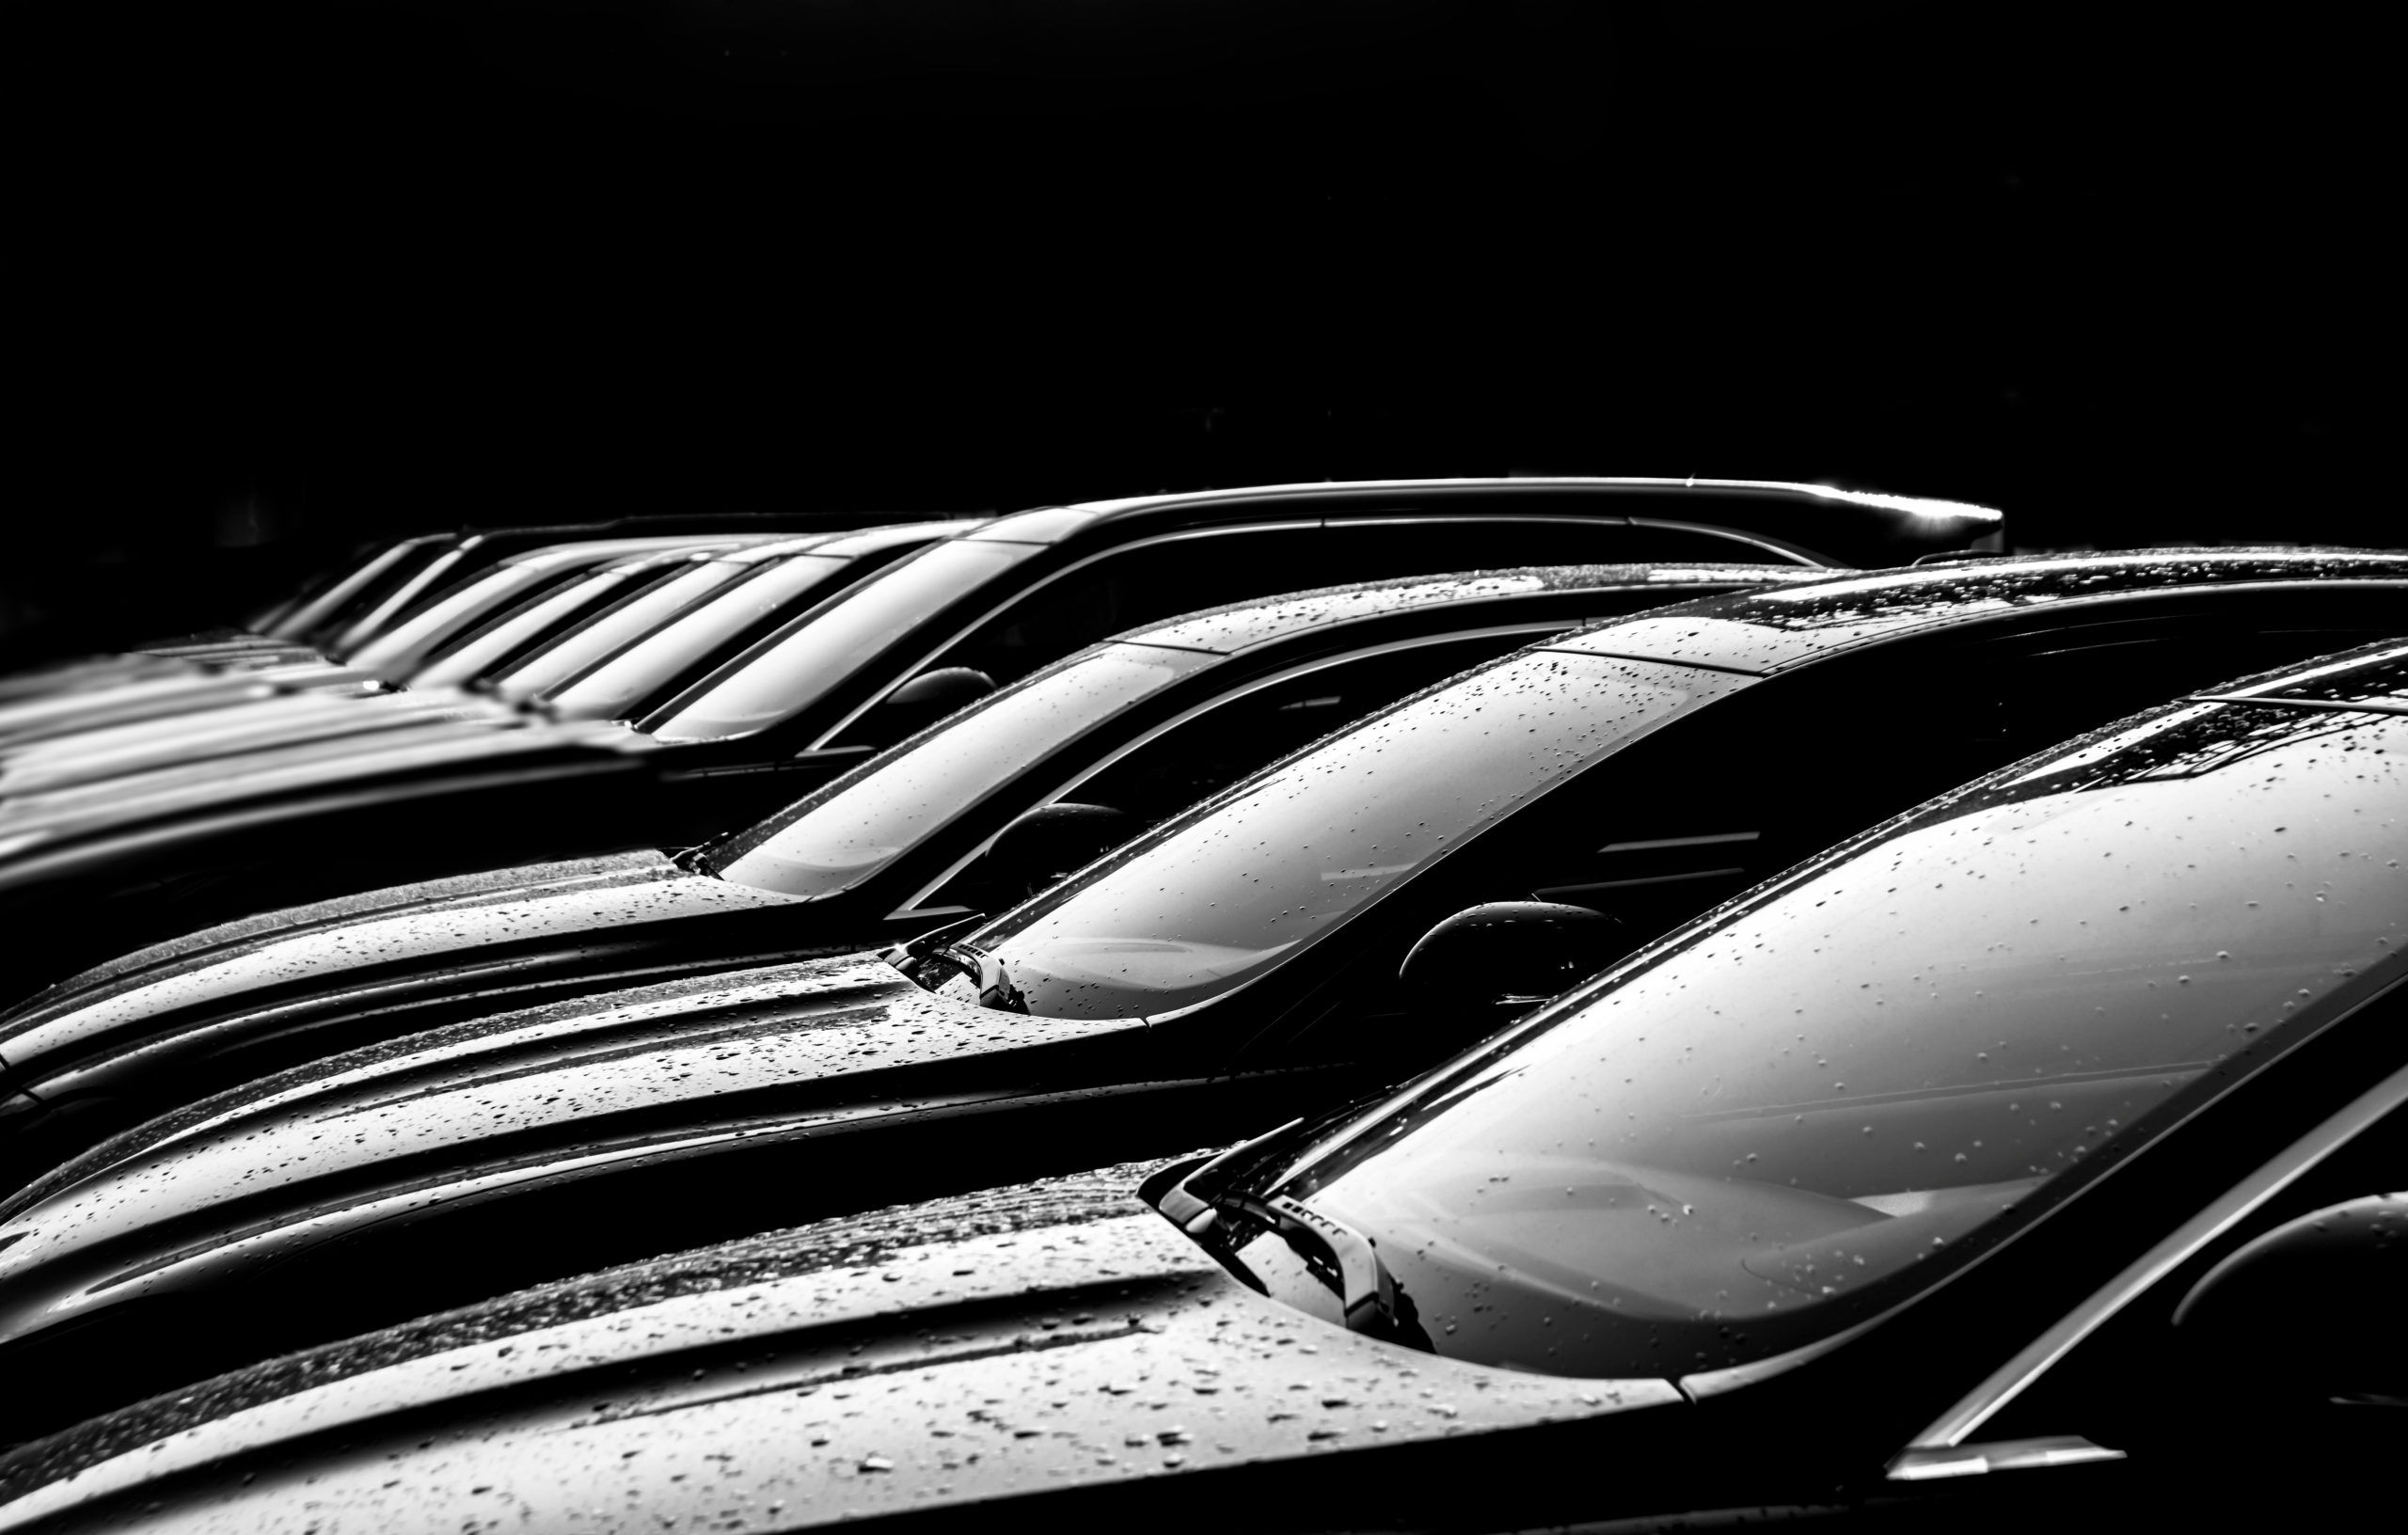 Black and white image of brand new cars in a row at a dealership.